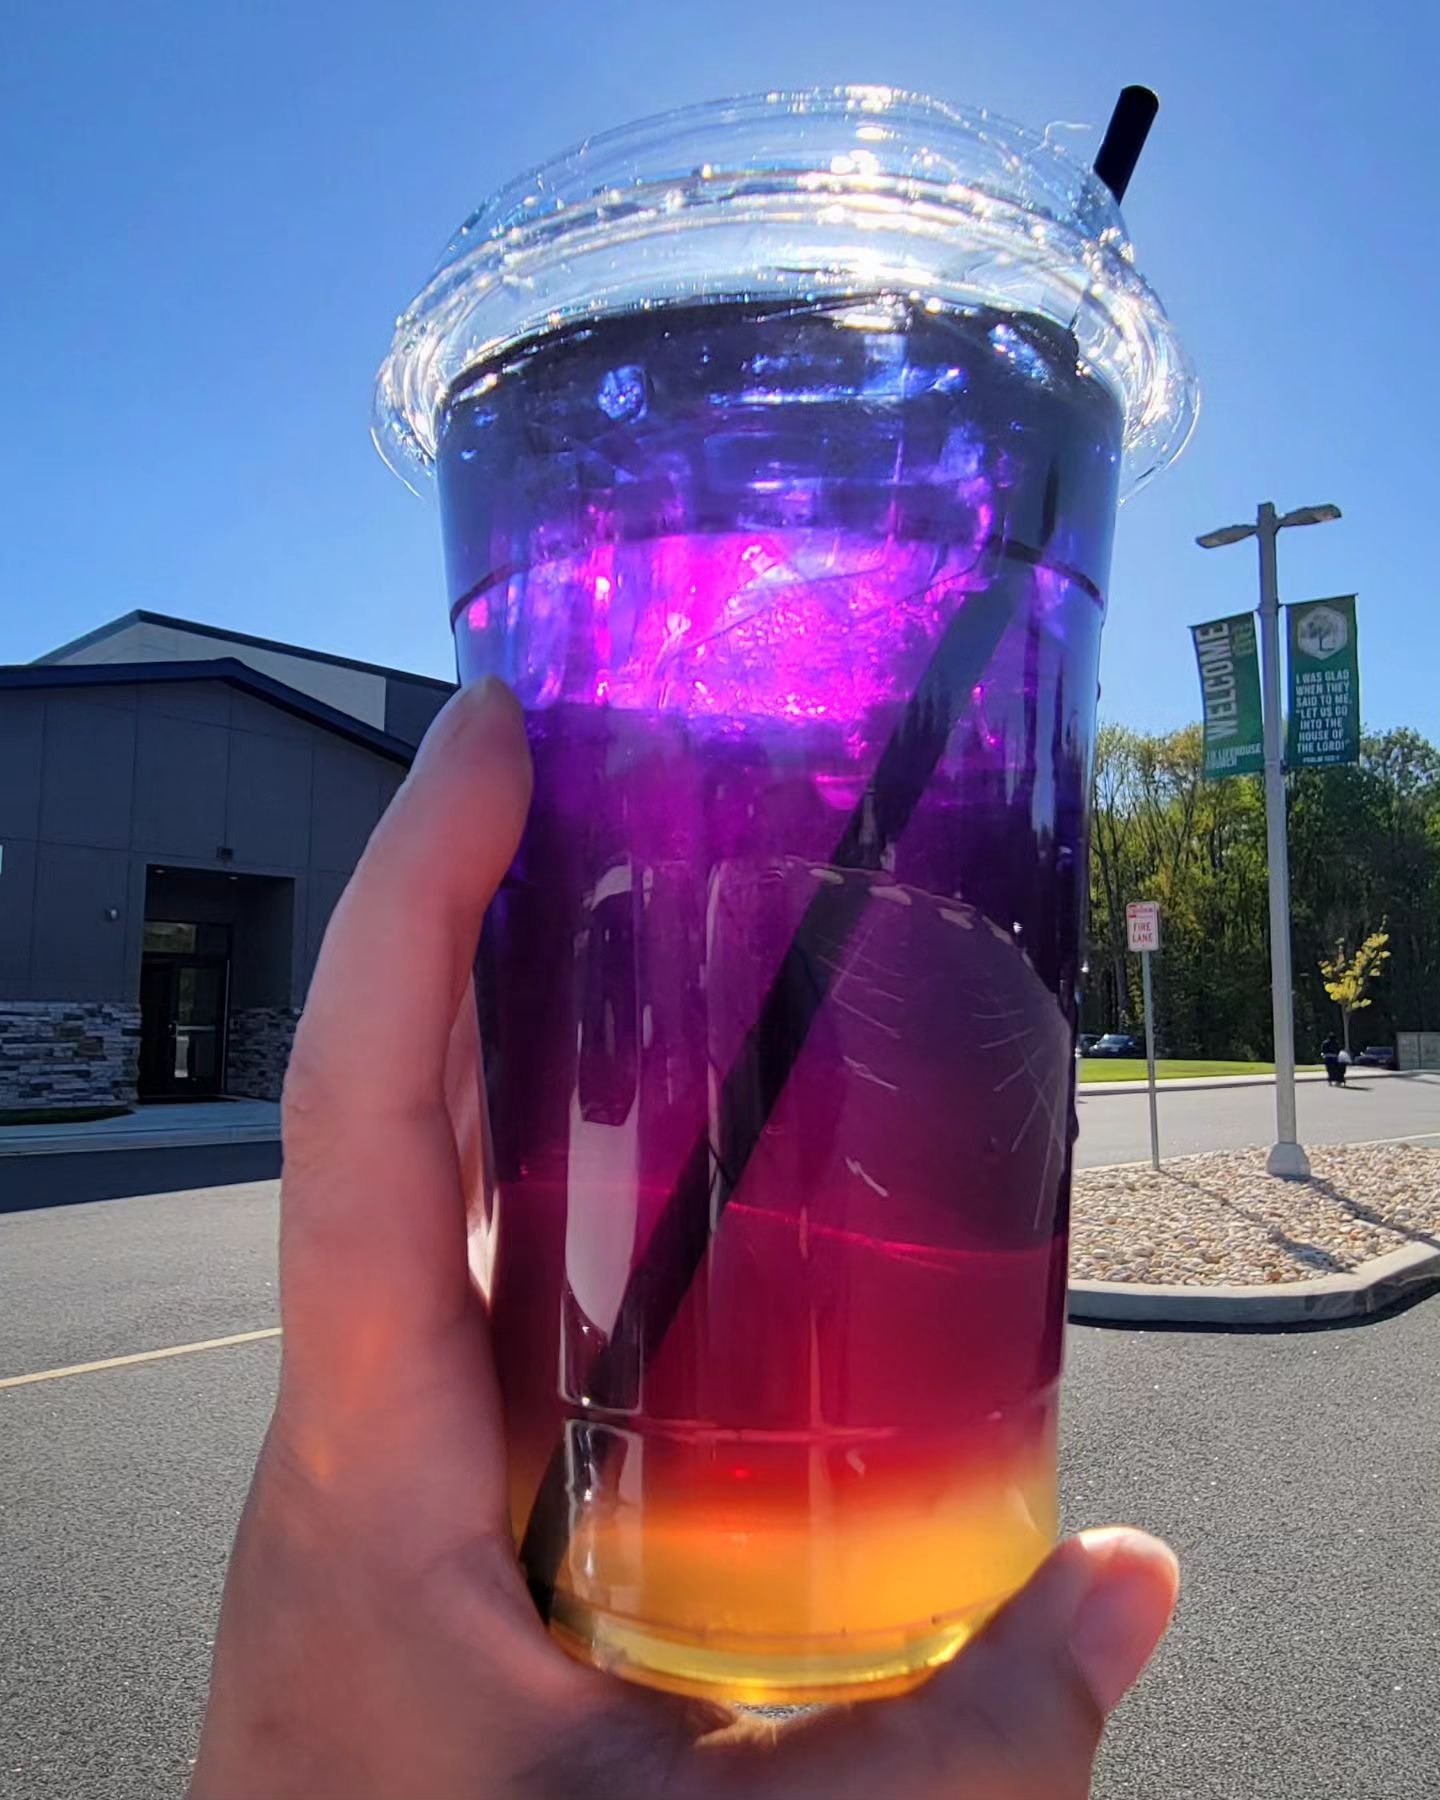 Beautiful and healthy has us feeling great on a Friday! Come in and get a Butterfly Pea Refresher before they fly away. 

#cafe1031 #Townsend #delaware #middletown #lifehousemot #cafe1031coffee #butterflypearefresher #butterflypea